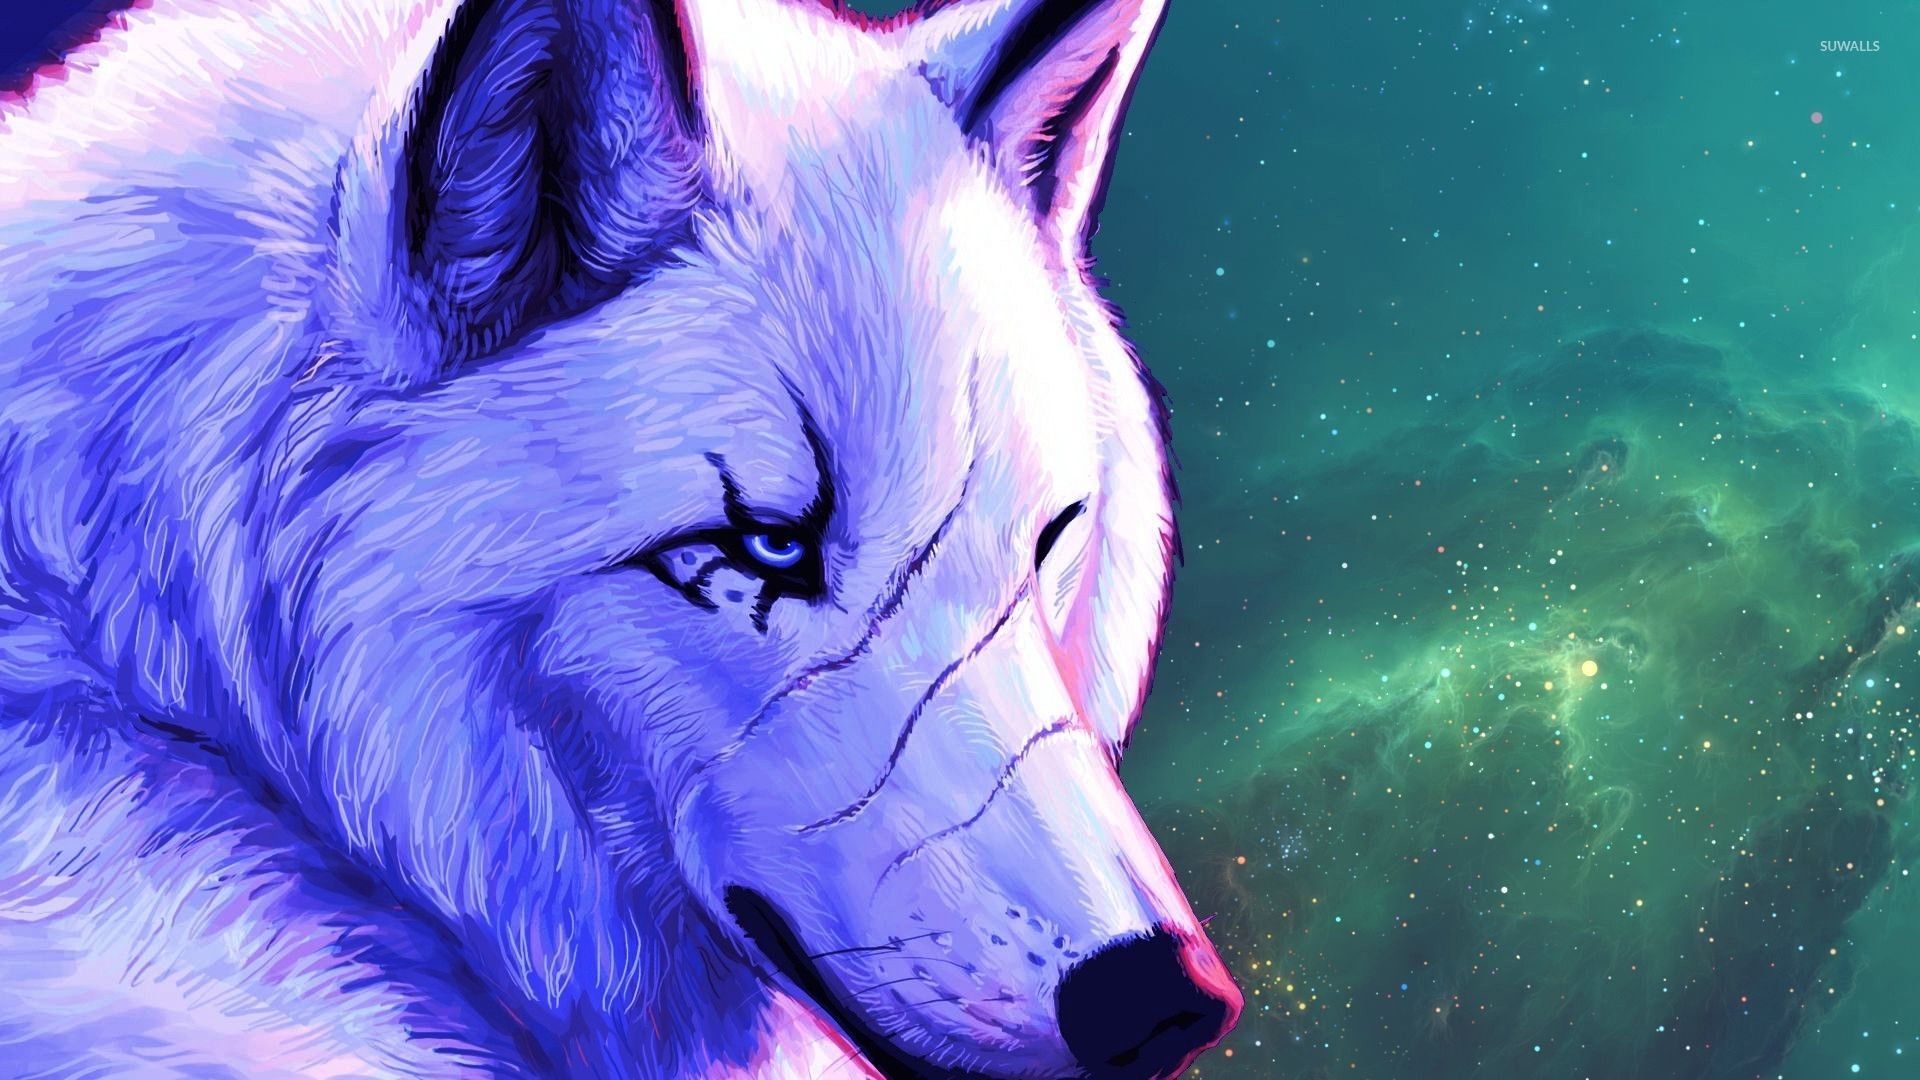 Stream Dat Alpha Wolf music  Listen to songs albums playlists for  free on SoundCloud